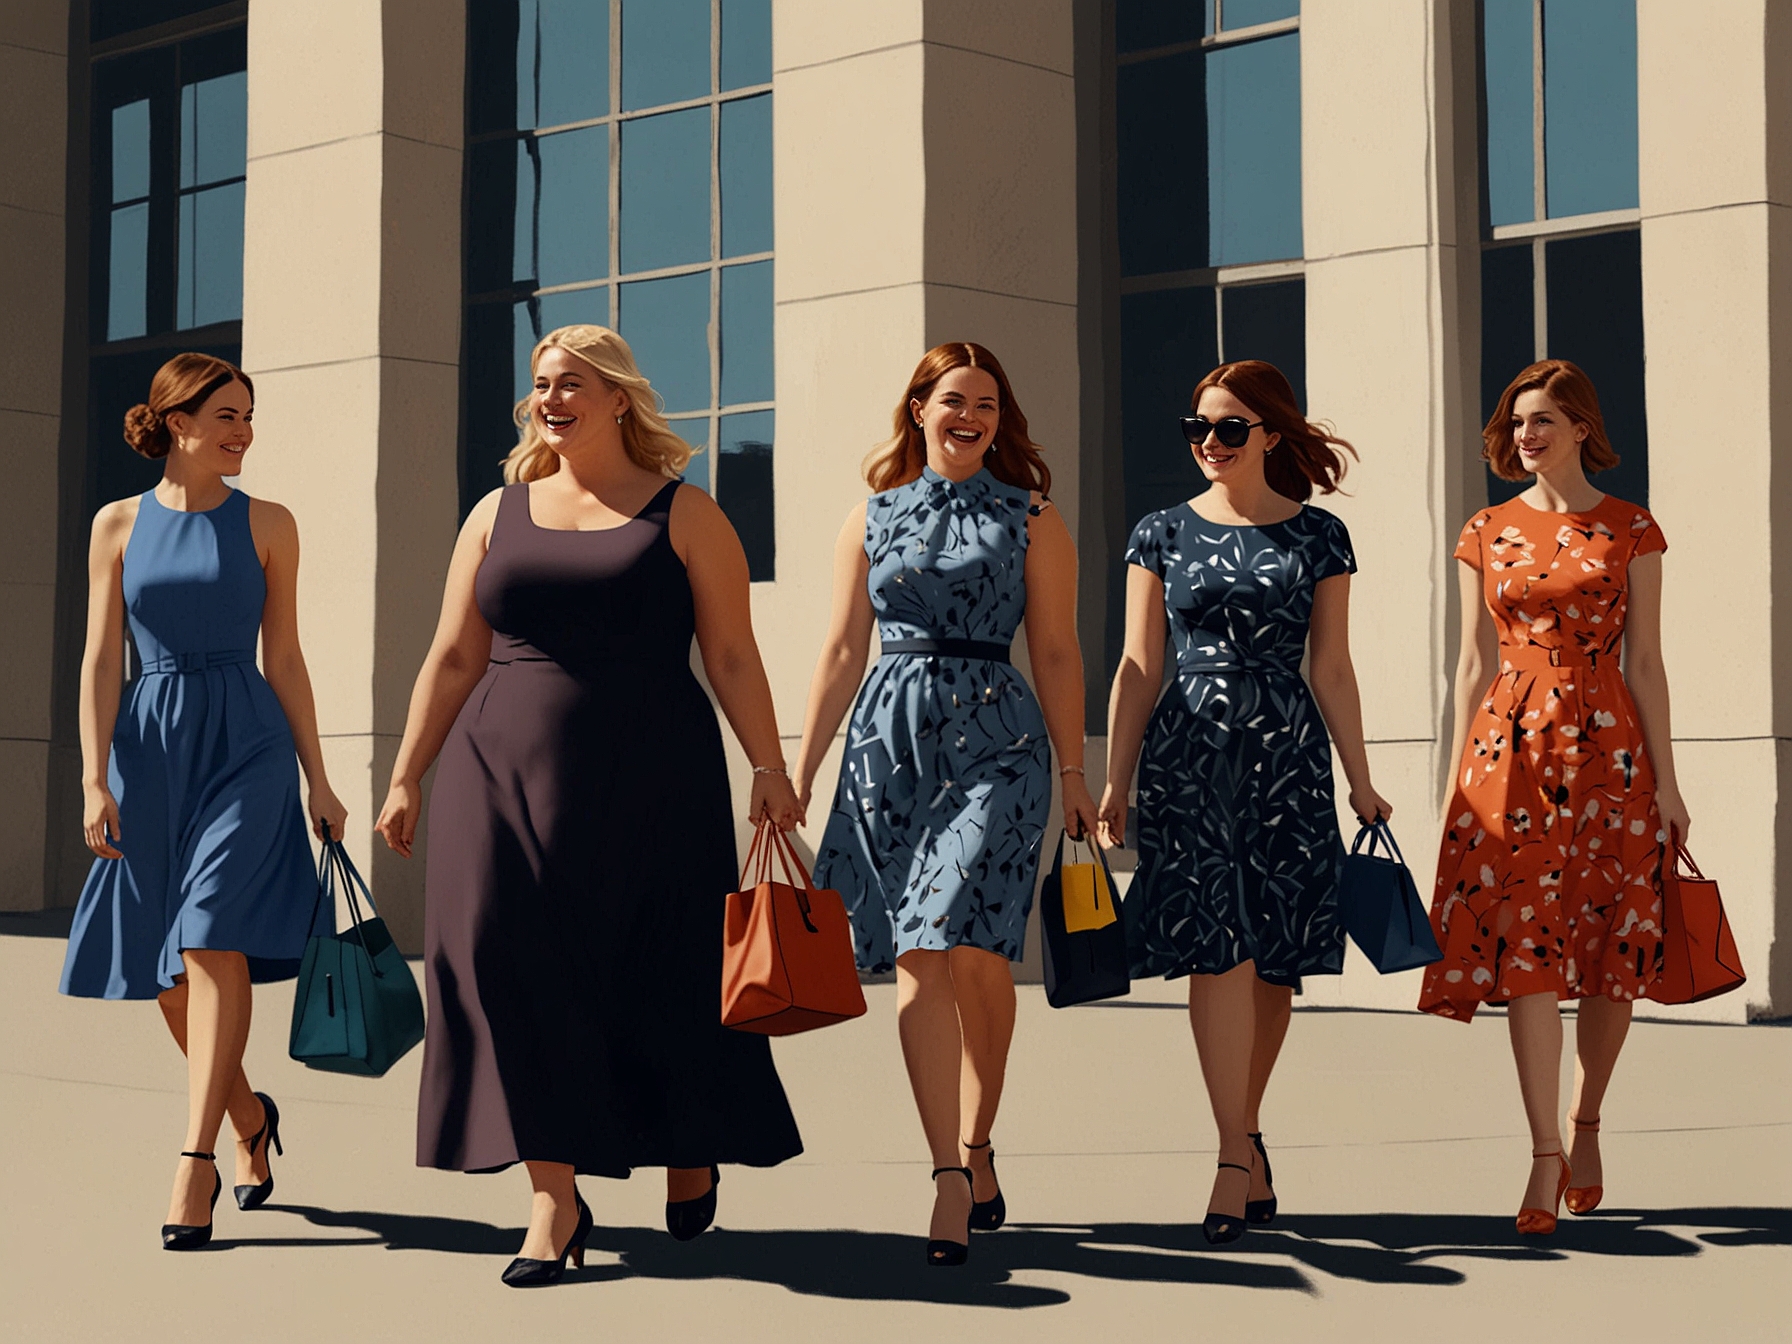 Multiple women in different sizes and colors of the M&S dress, demonstrating its versatile design and excellent fit. They're smiling and enjoying a sunny day, reinforcing the dress's comfort and style.